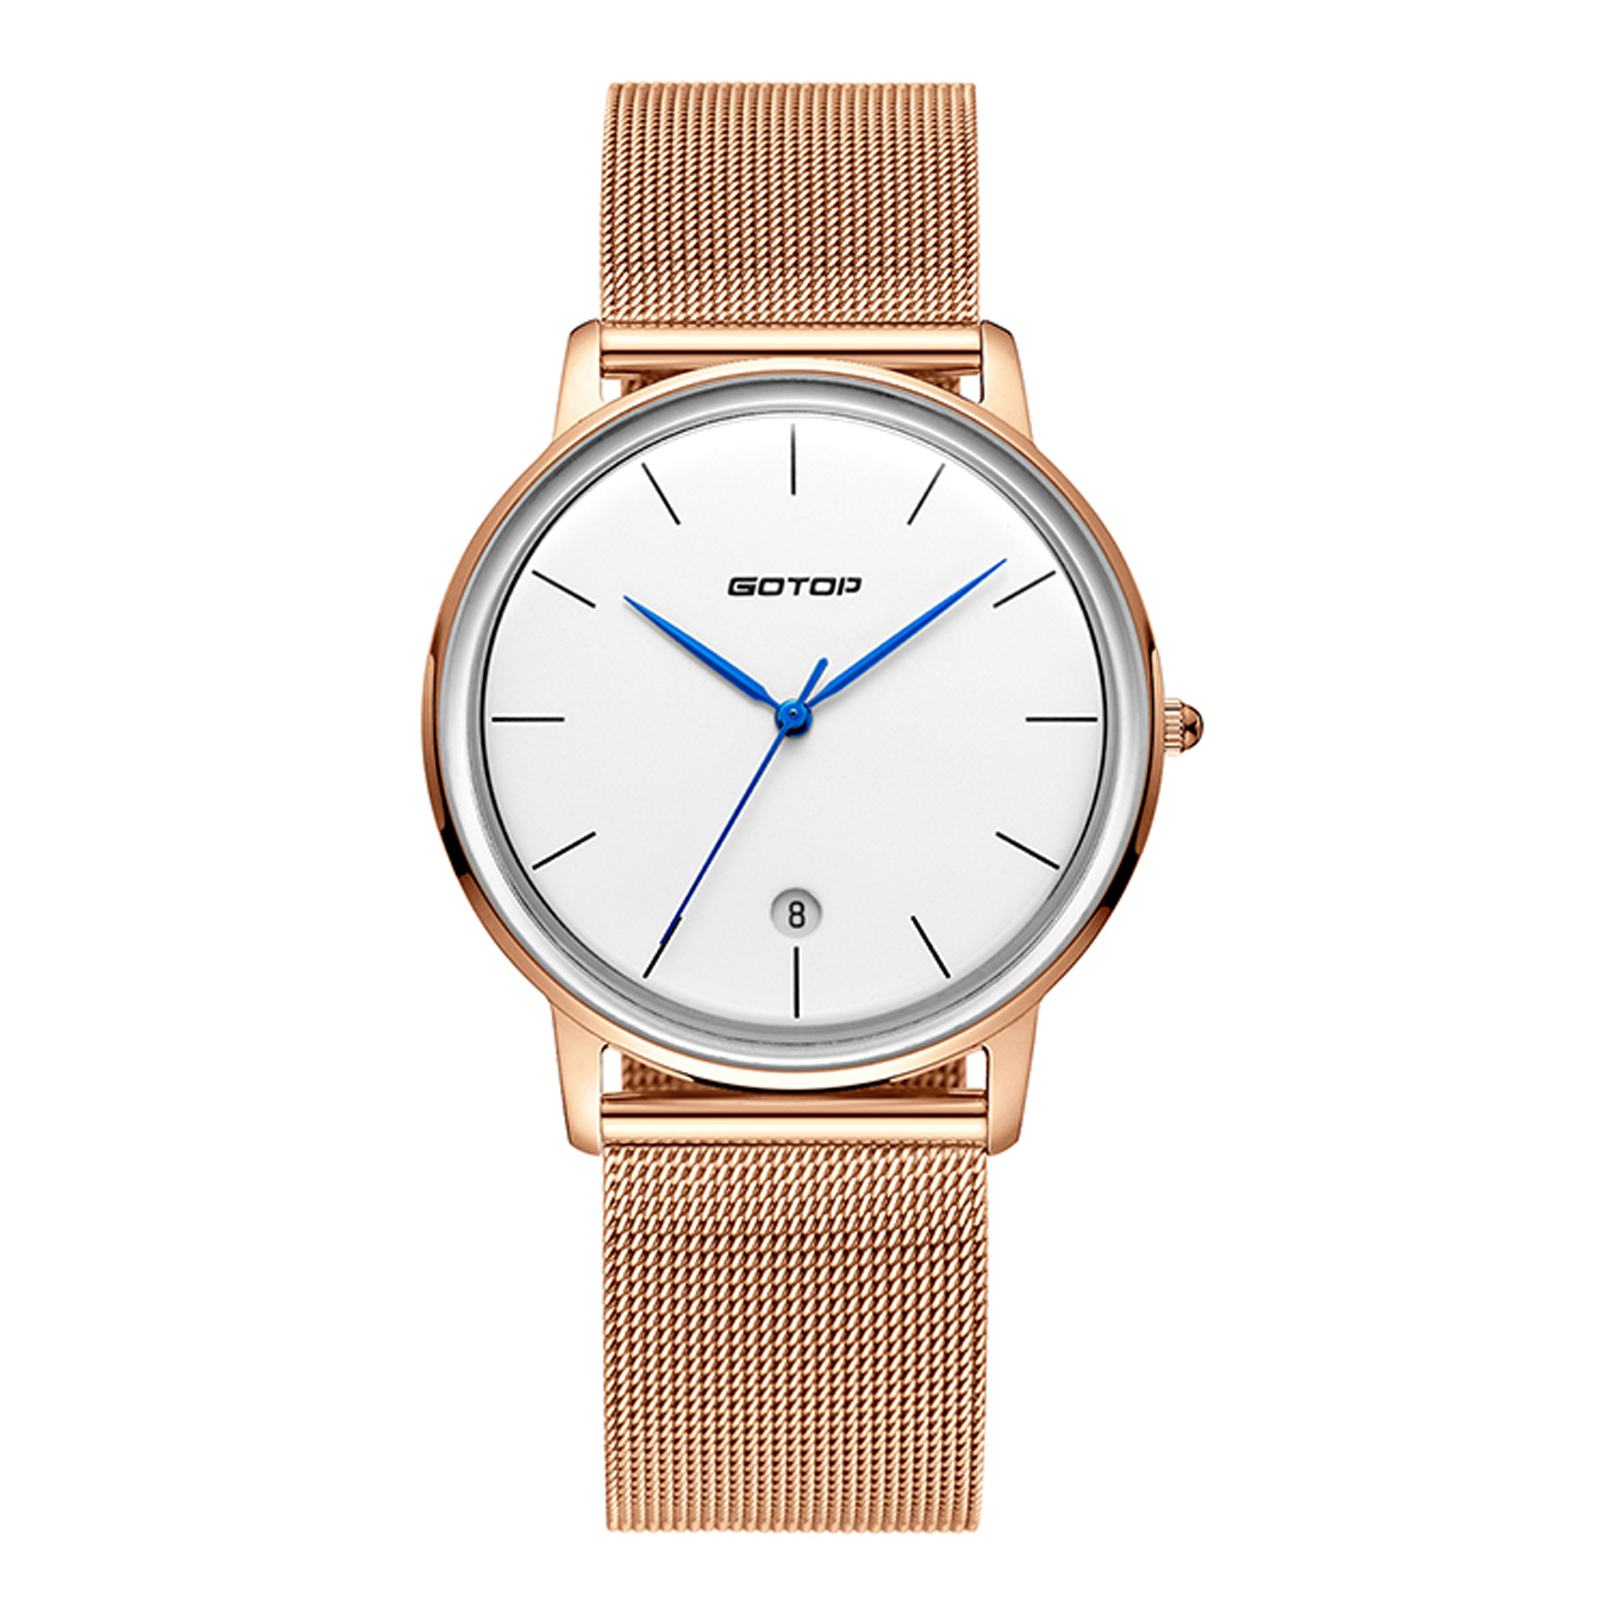 Gold Men's Watch With Metal Mesh Band